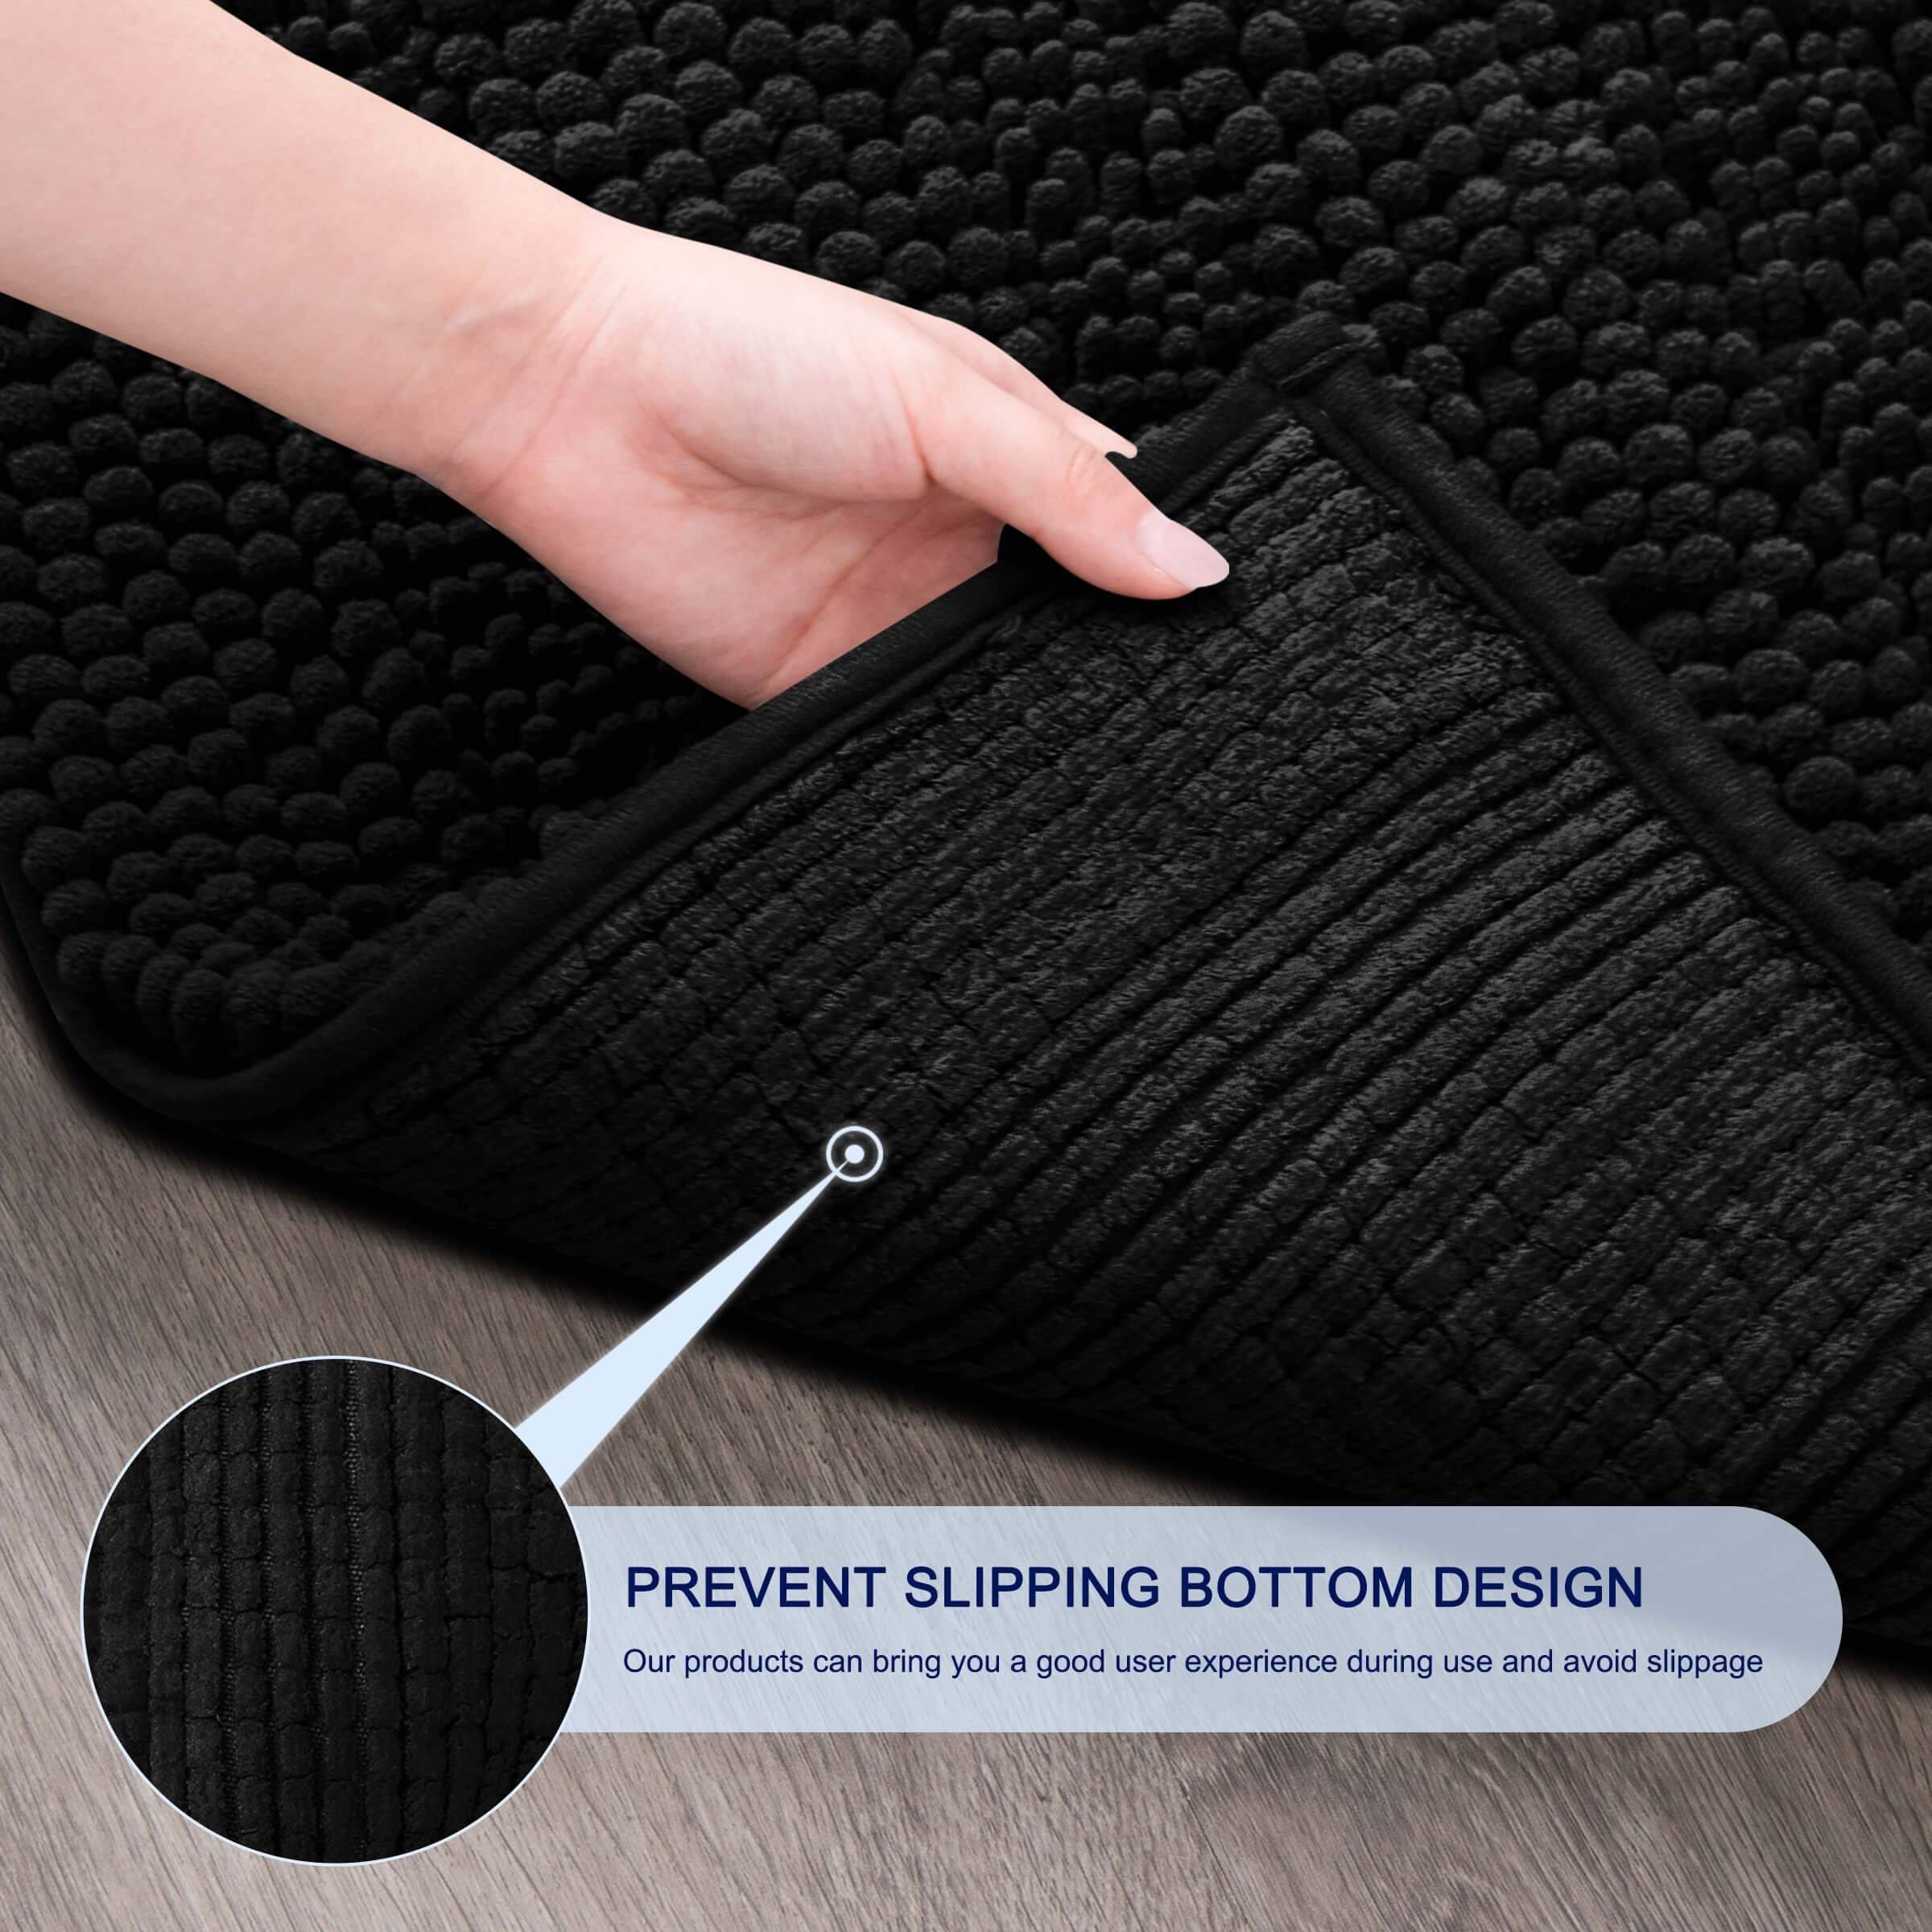 https://ak1.ostkcdn.com/images/products/is/images/direct/af4c3f276bcdf7d0351e6c68e853fa774b14407f/Subrtex-Supersoft-and-Absorbent-Braided-Bathroom-Rugs-Chenille-Bath-Rugs.jpg